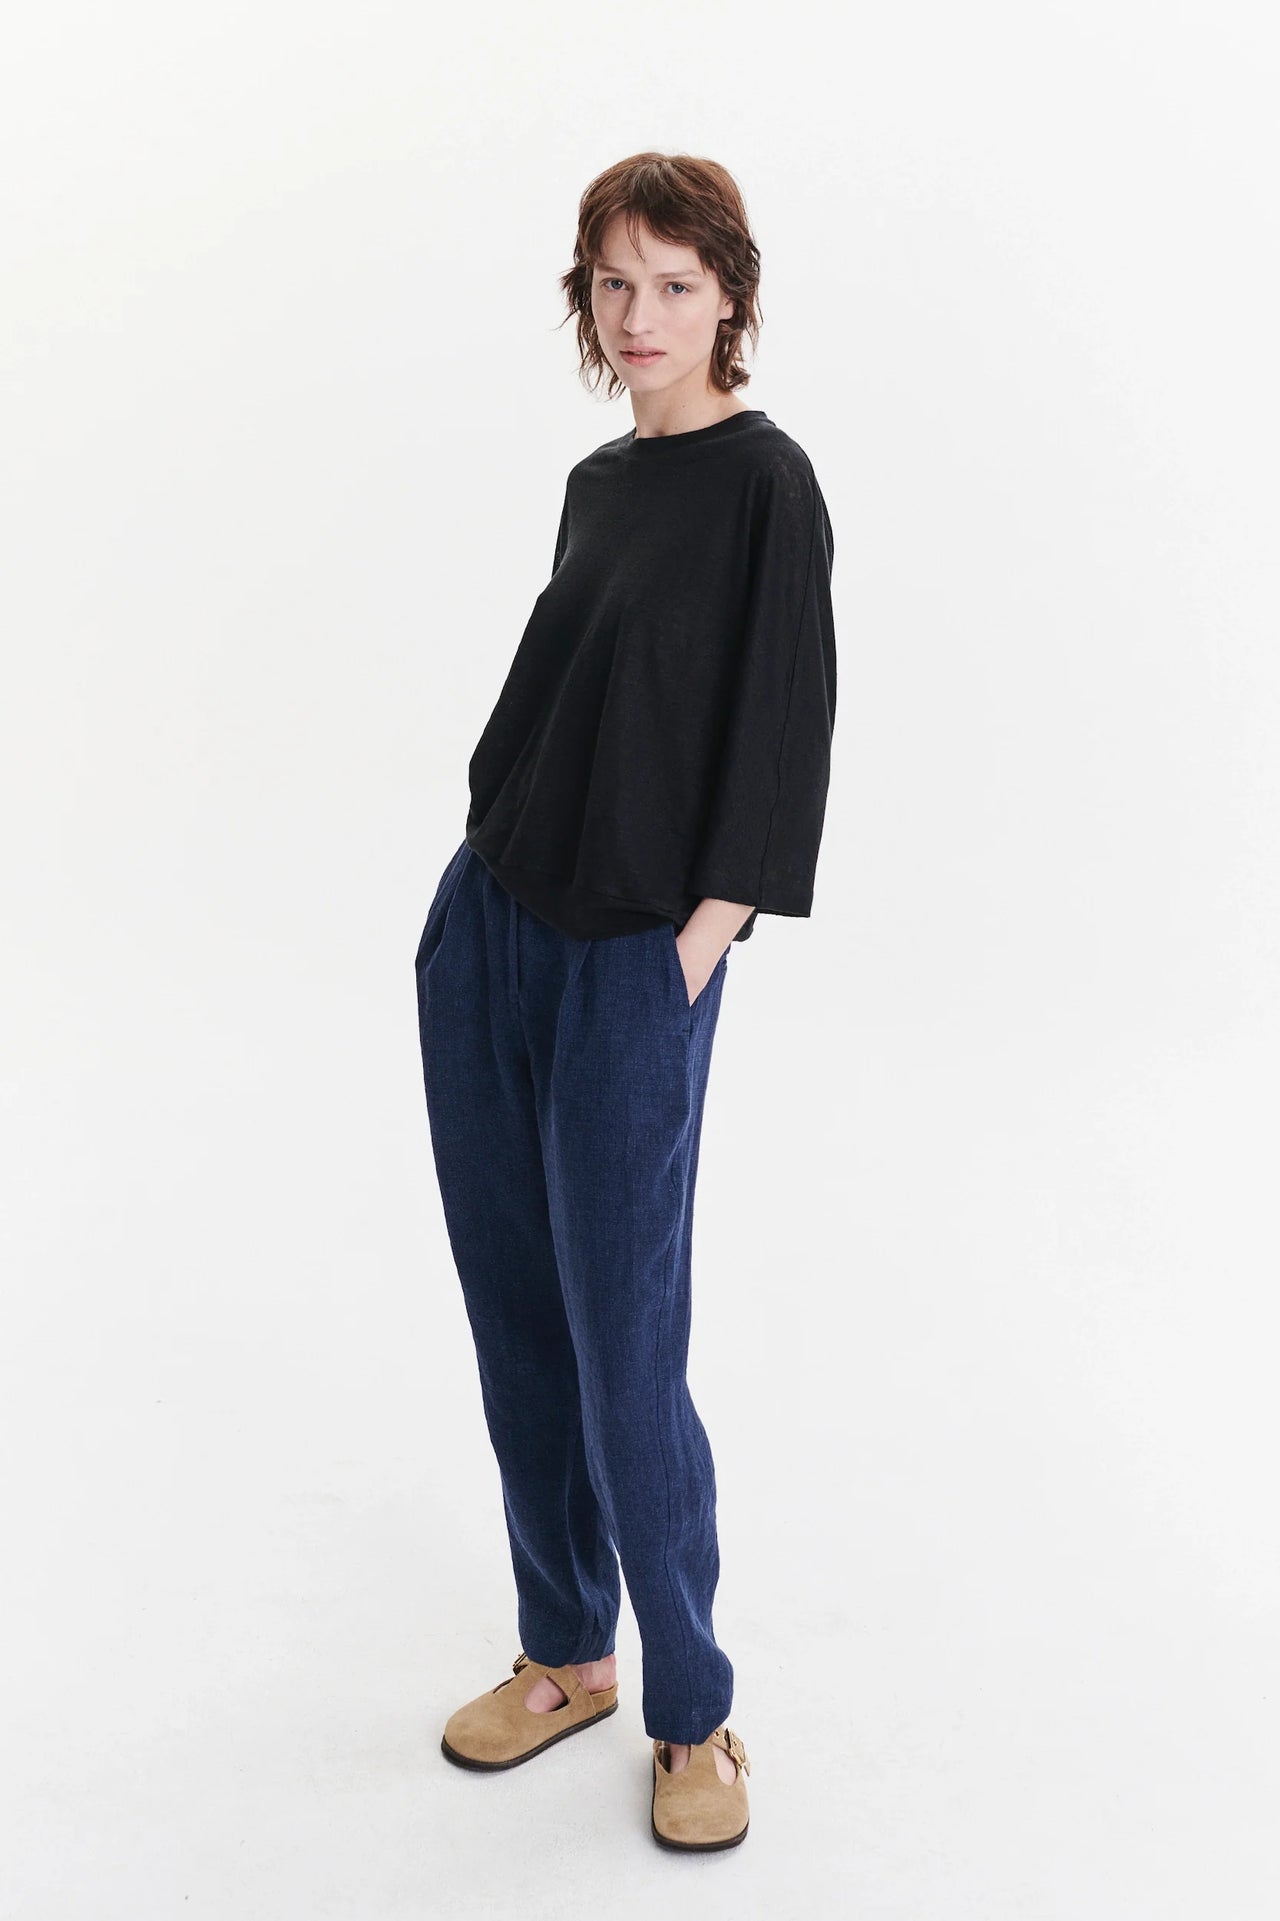 Threequarter Sleeve Top in the Finest Black Lithuanian Linen Jersey